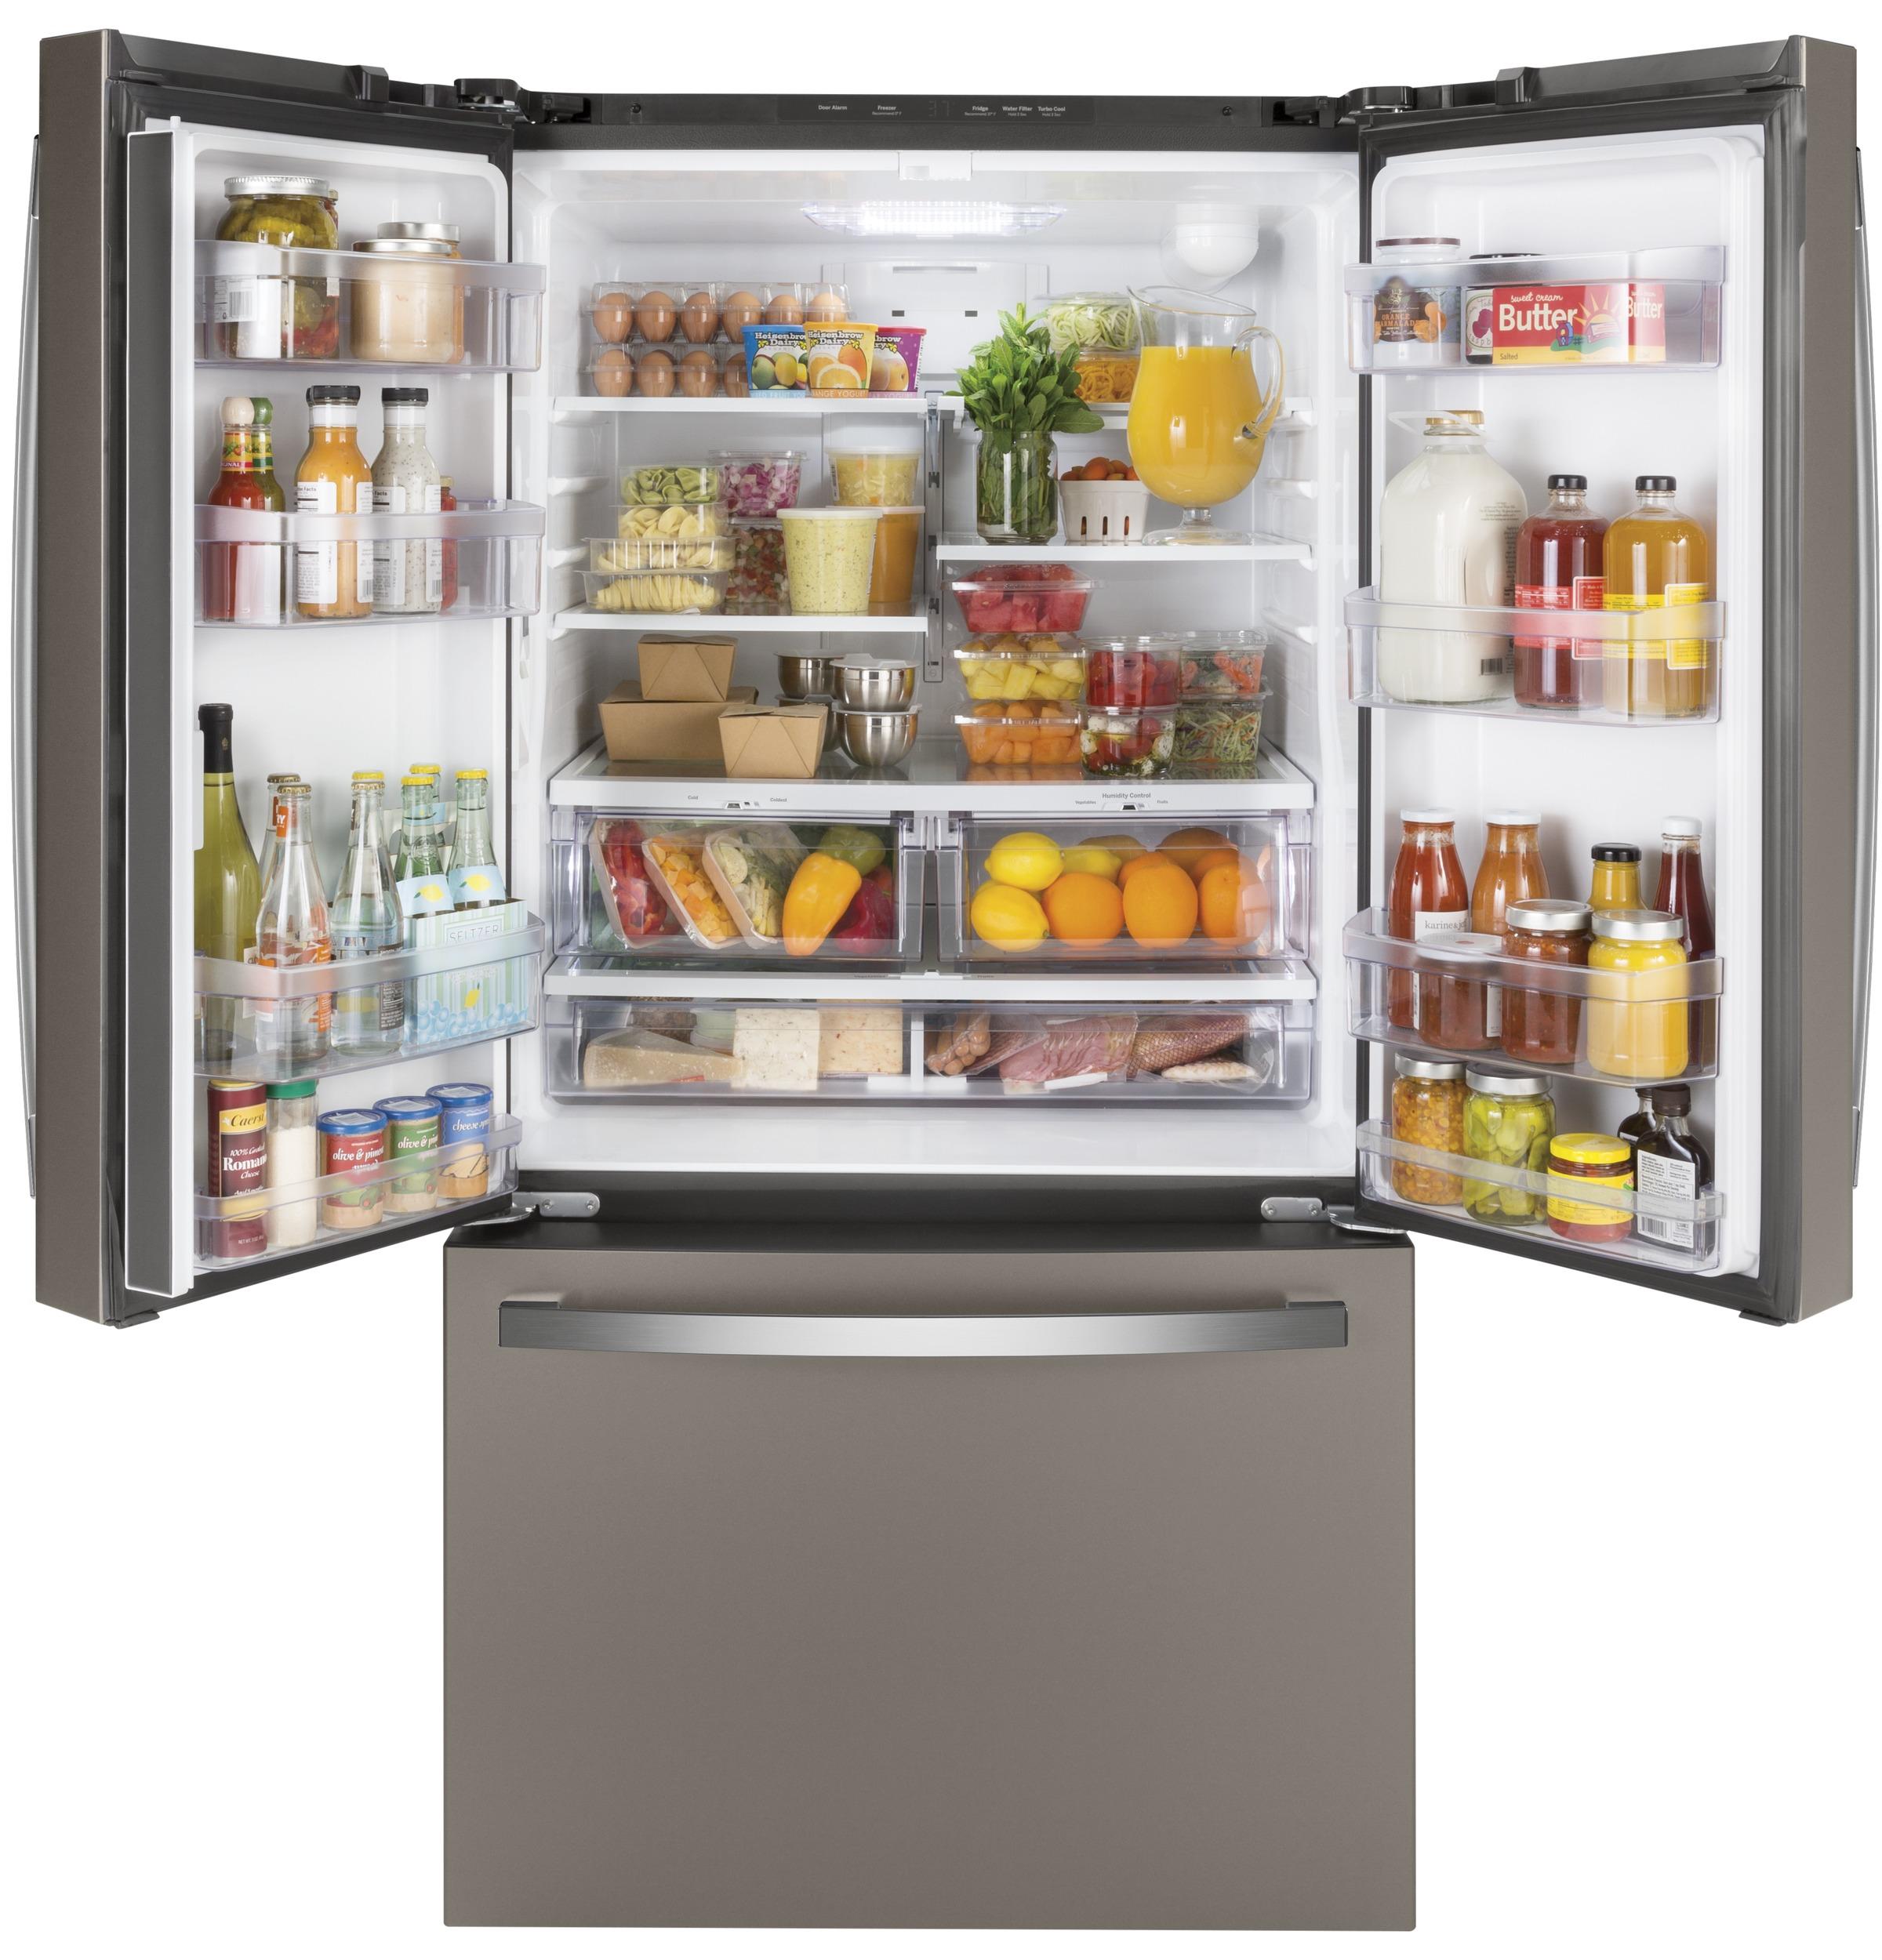 GE GNE27JMMES 36 French Door Refrigerator with 27 cu. ft. Total Capacity in Slate - image 2 of 5